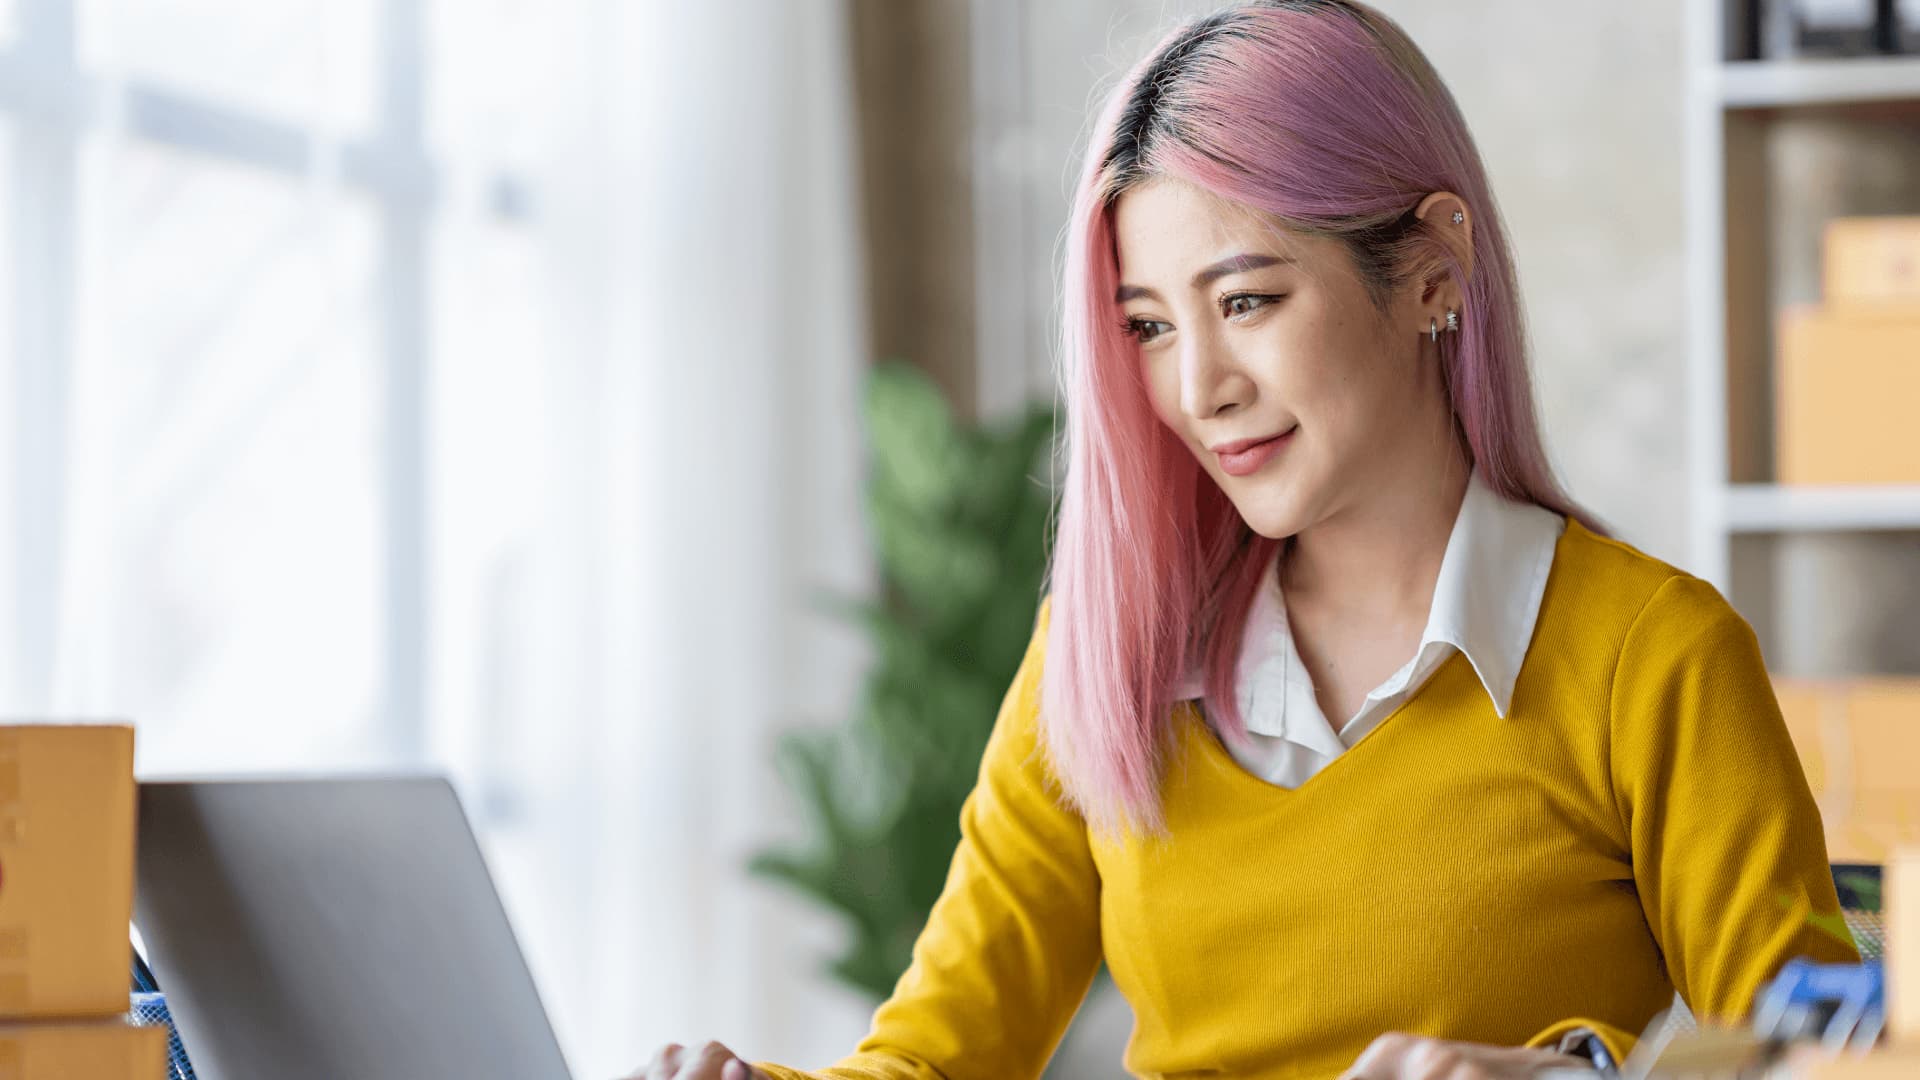 Woman with pink hair studying data management degree course from home.